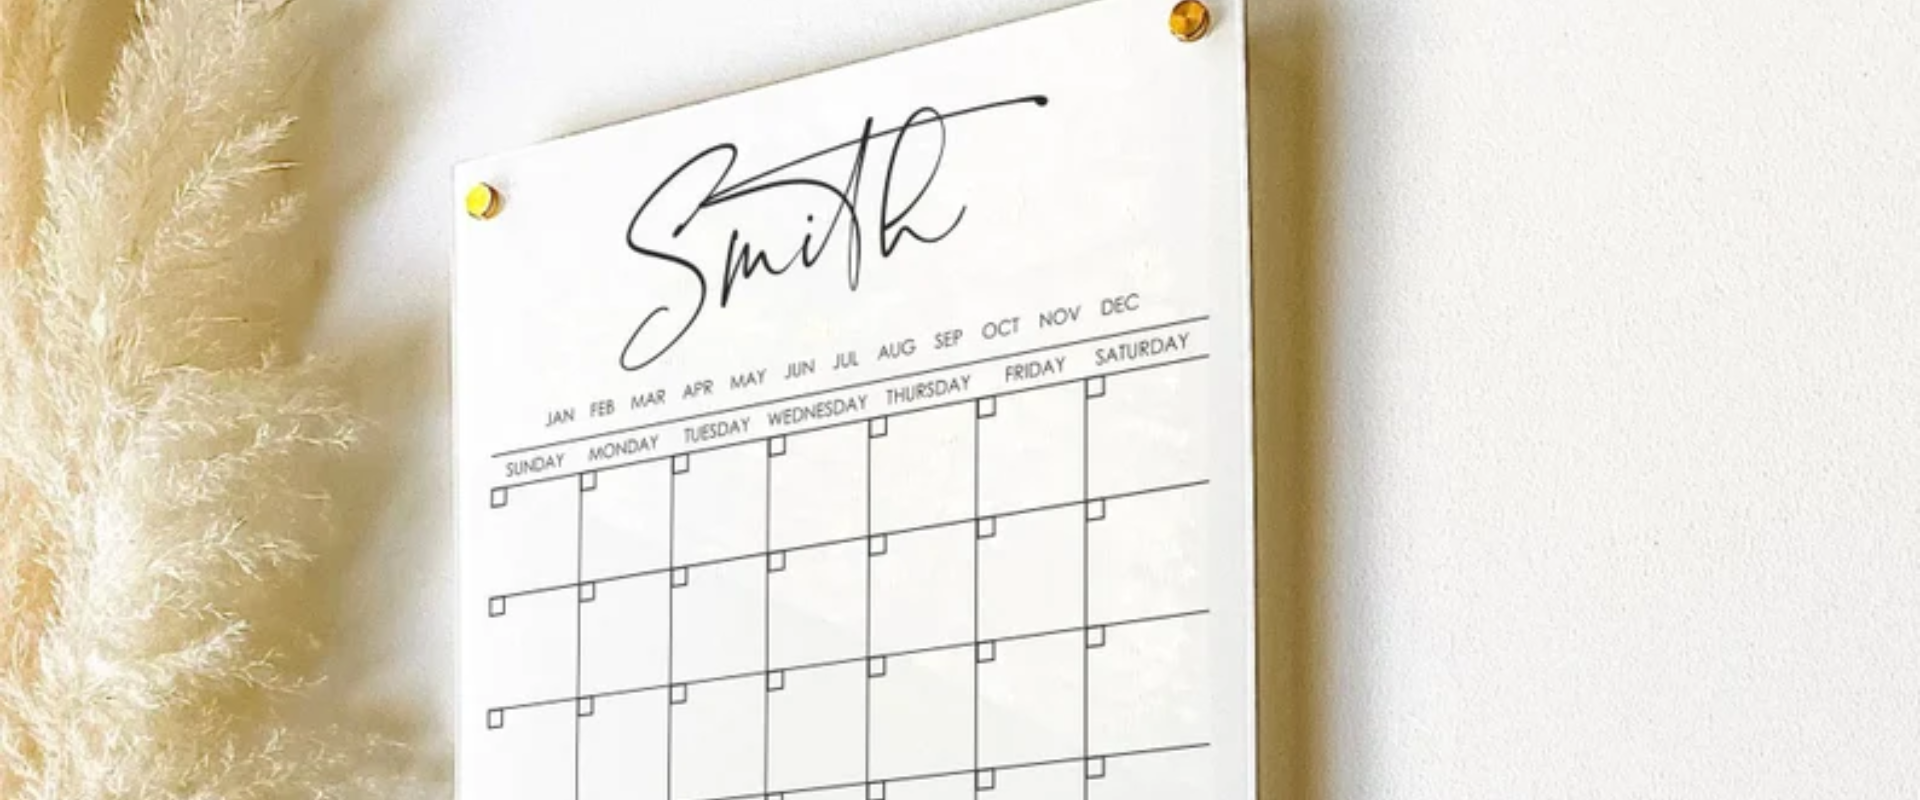 A calendar hanging on a wall with the word smith on it.